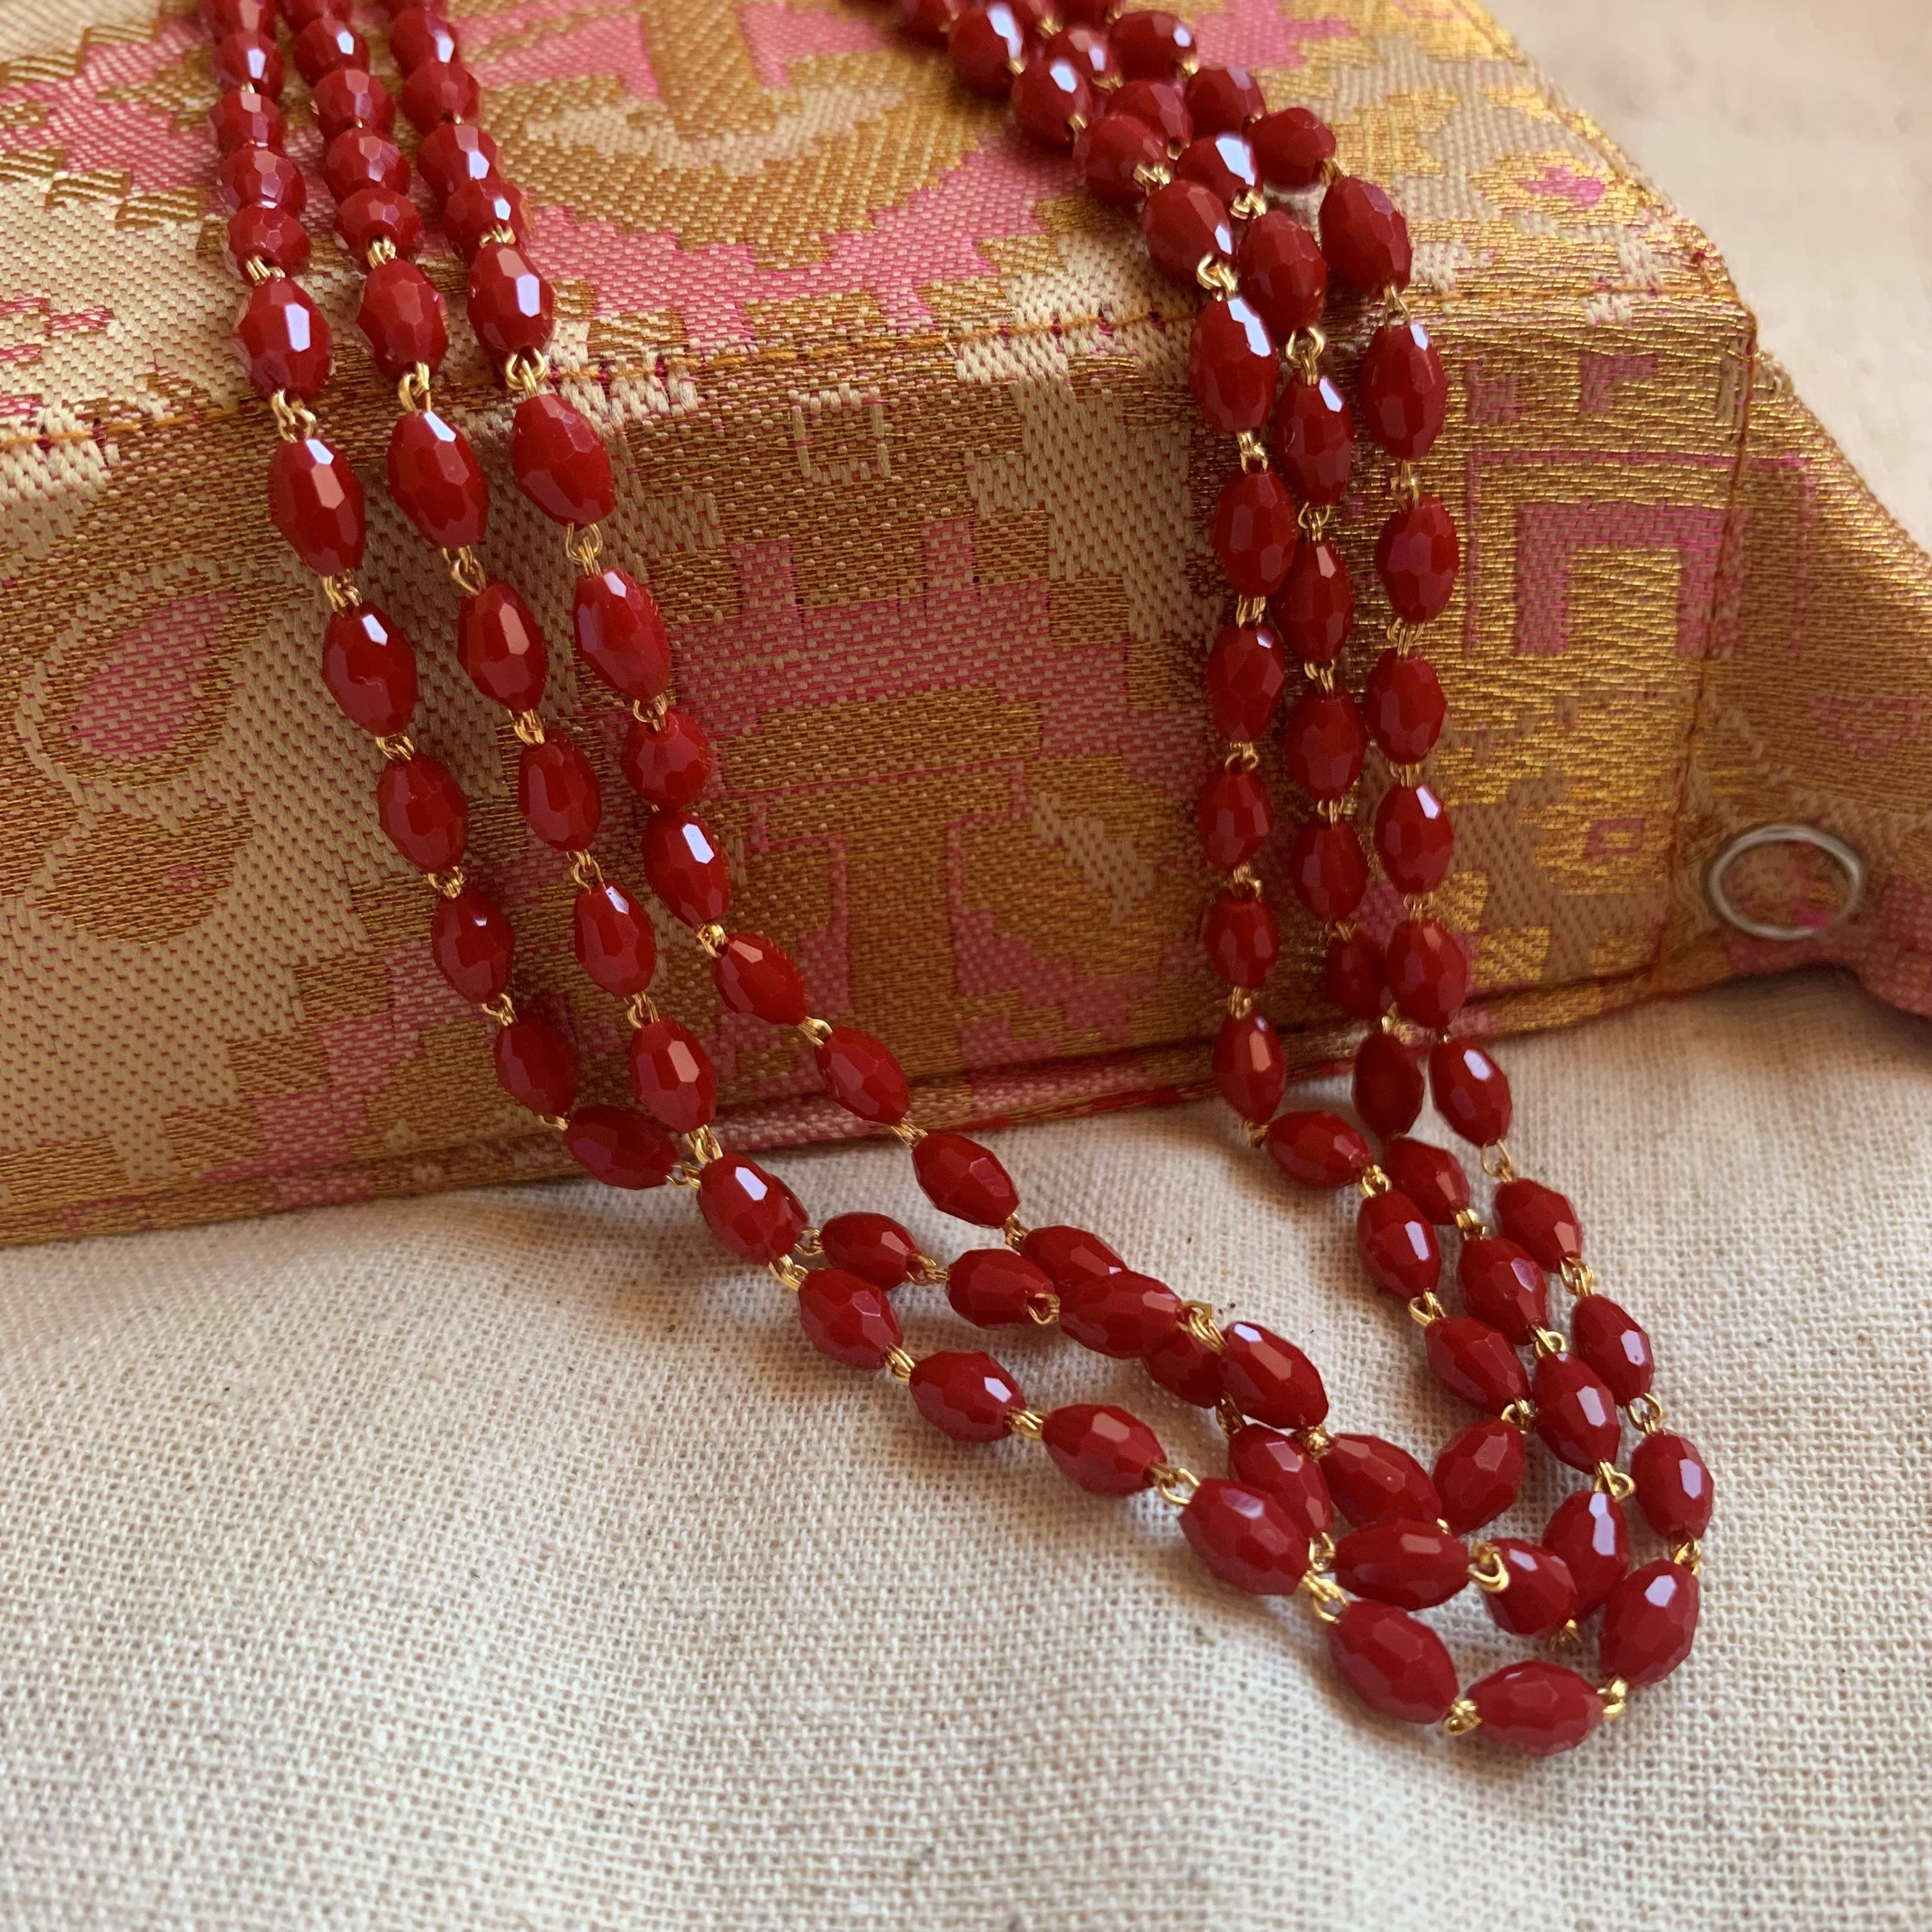 Beaded Necklace to Treasure in Maroon